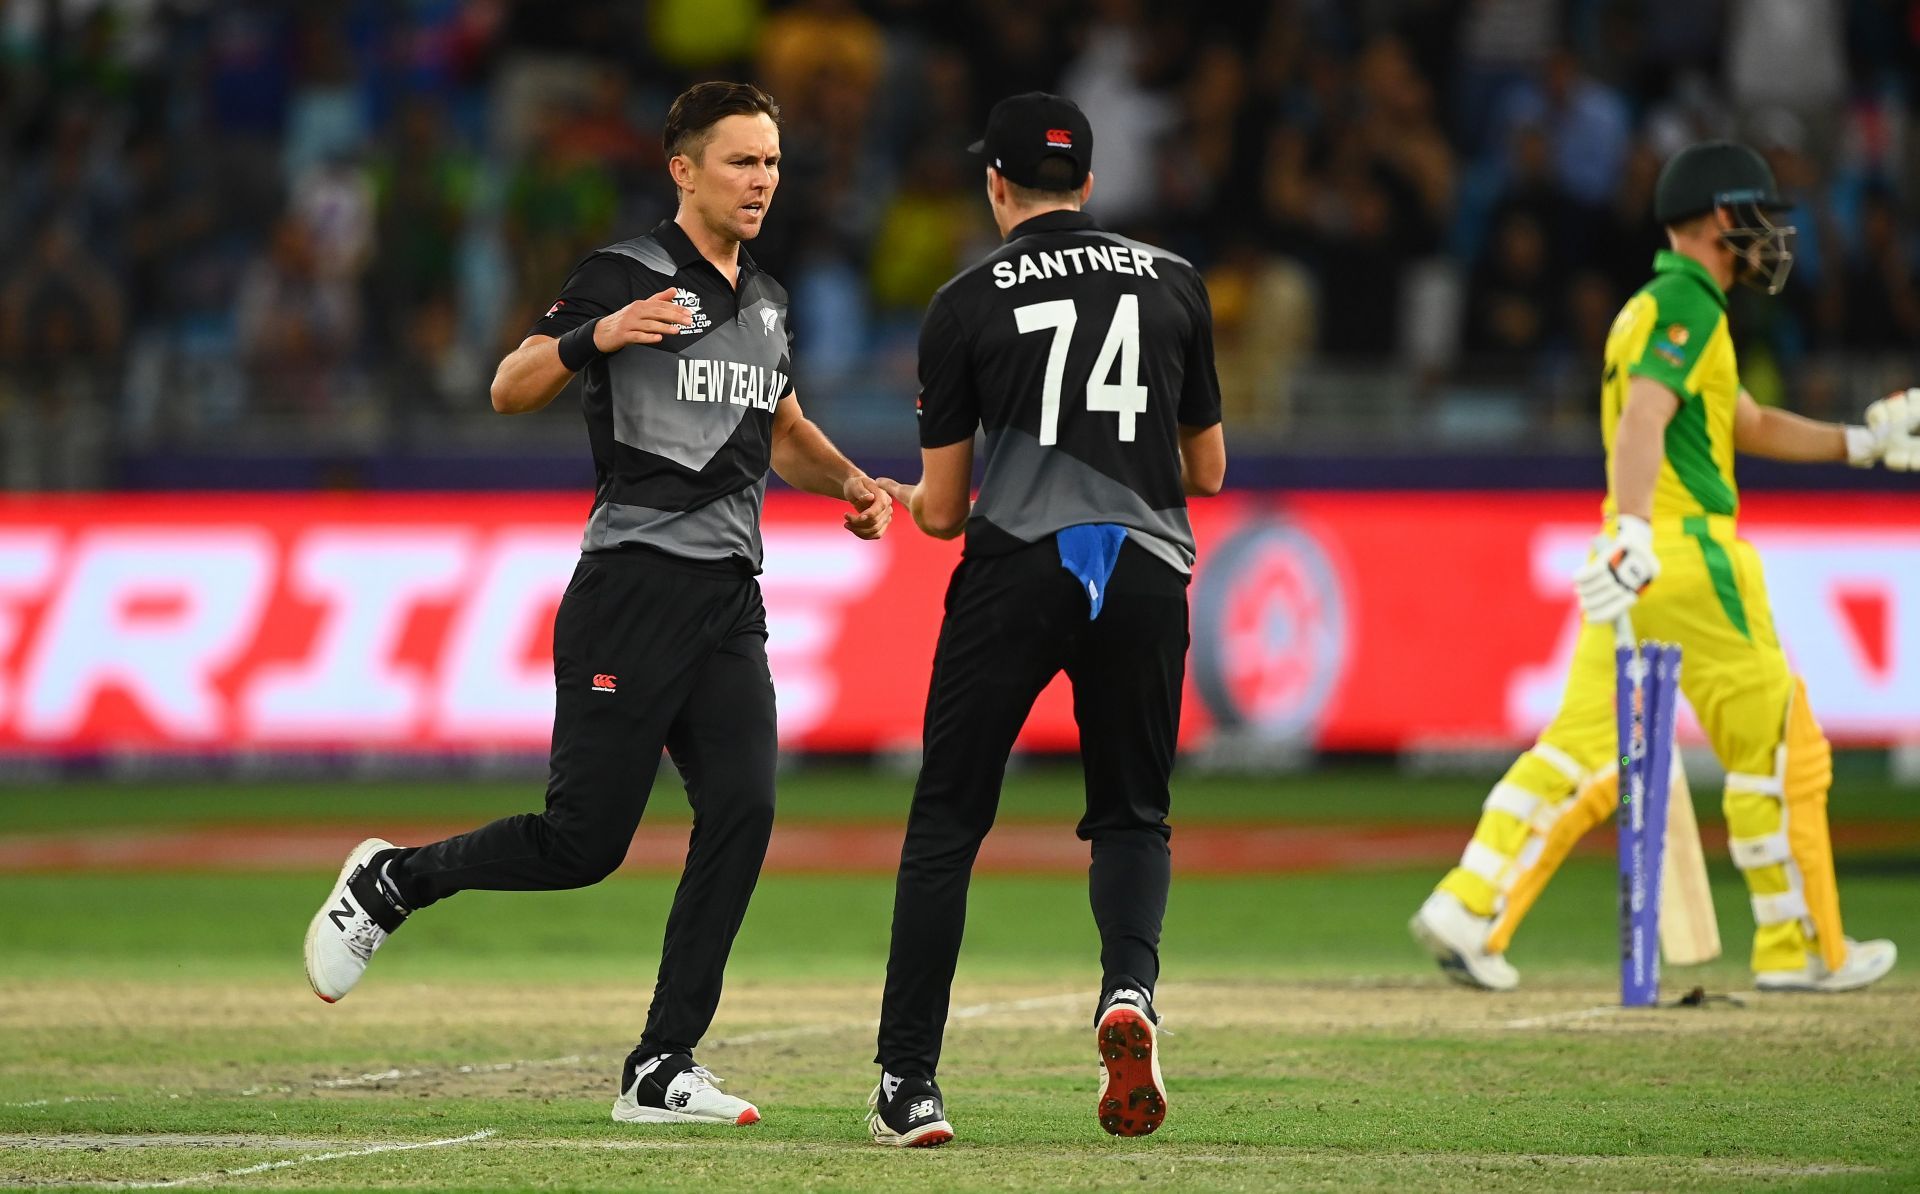 New Zealand fell to defeat against Australia in the finals of the T20 World Cup.